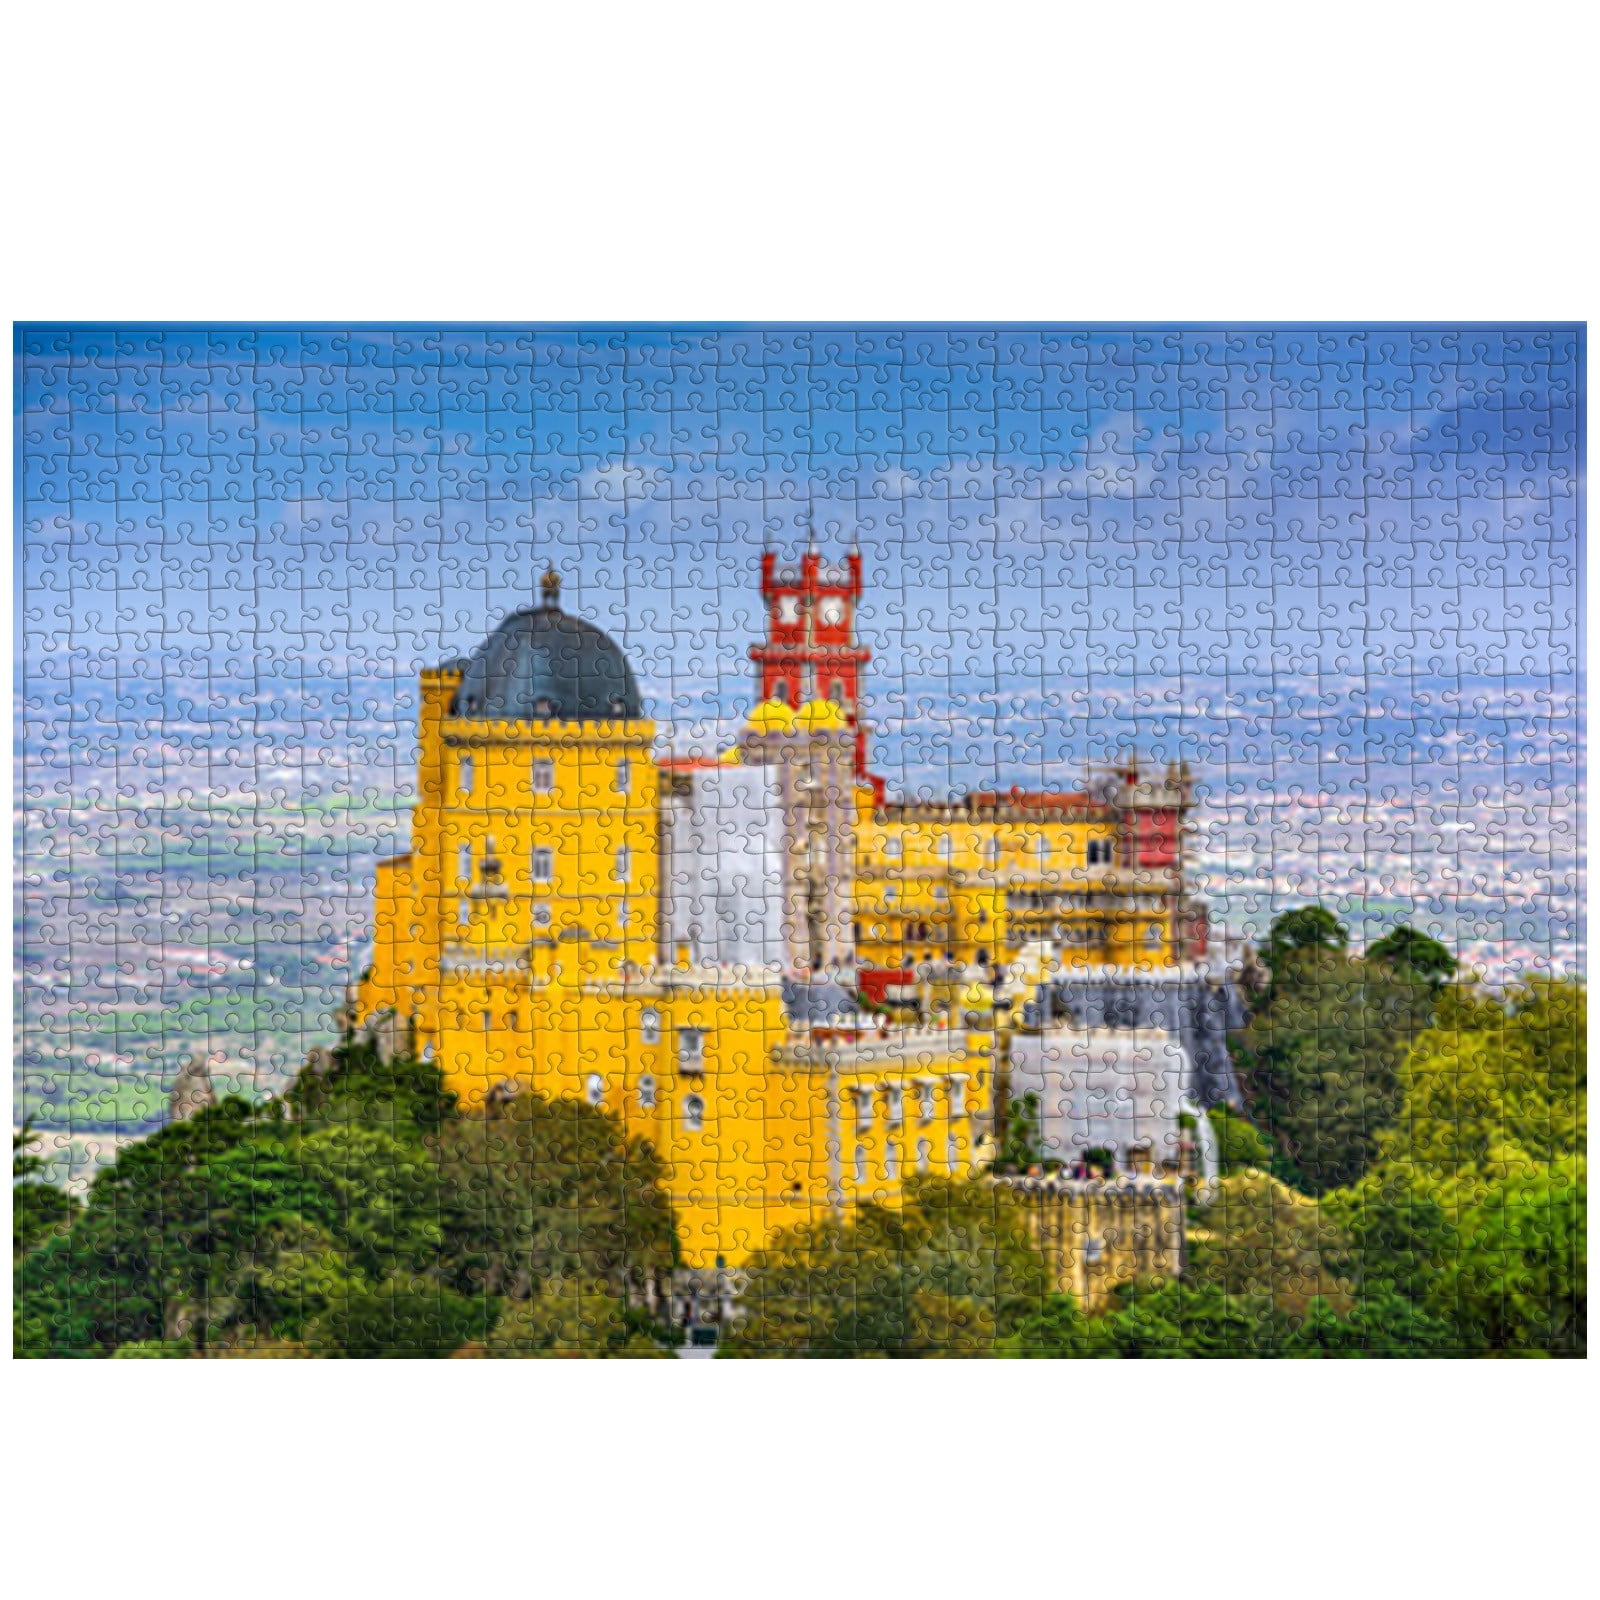 Times Square 300 Large Piece Jigsaw Puzzle 